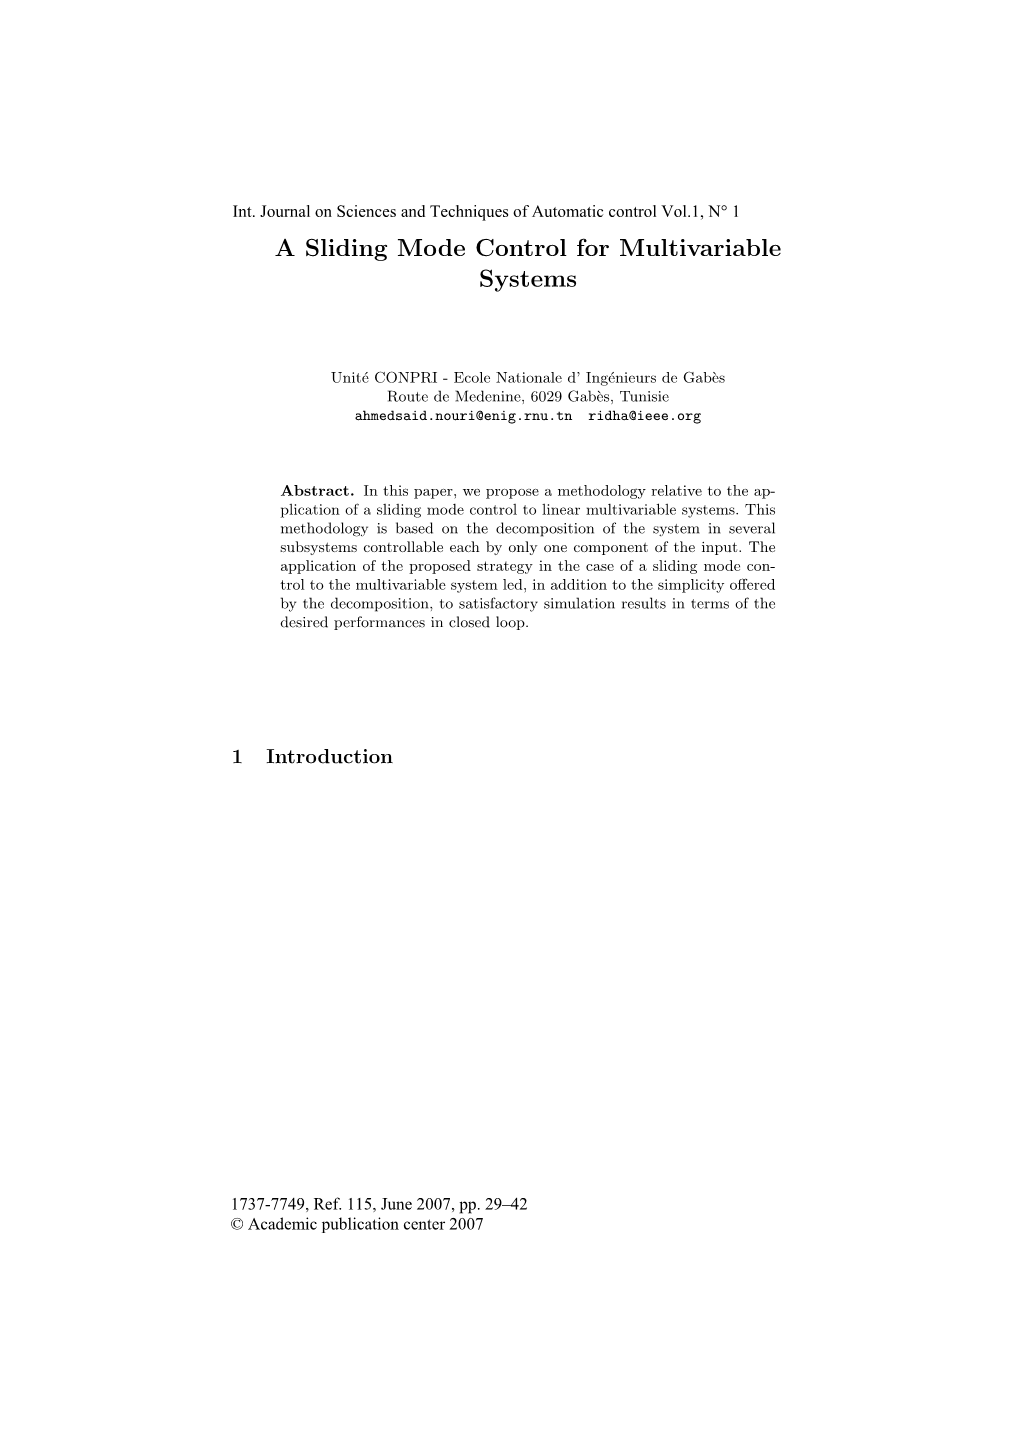 A Sliding Mode Control for Multivariable Systems